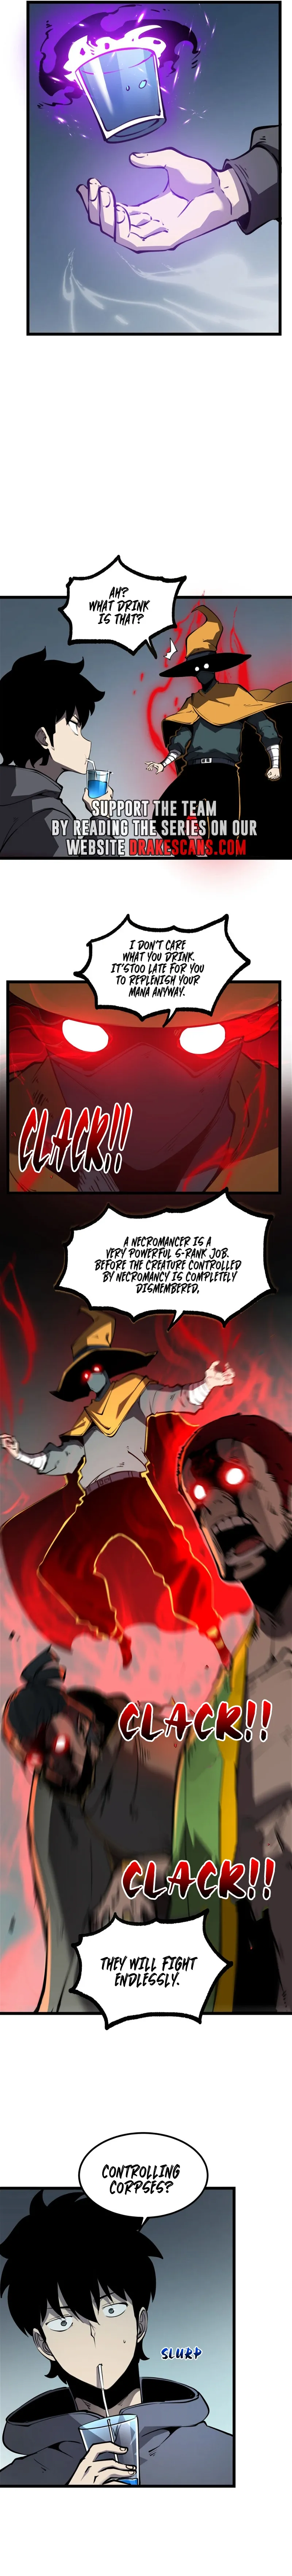 I Became The King by Scavenging Chapter 17 page 7